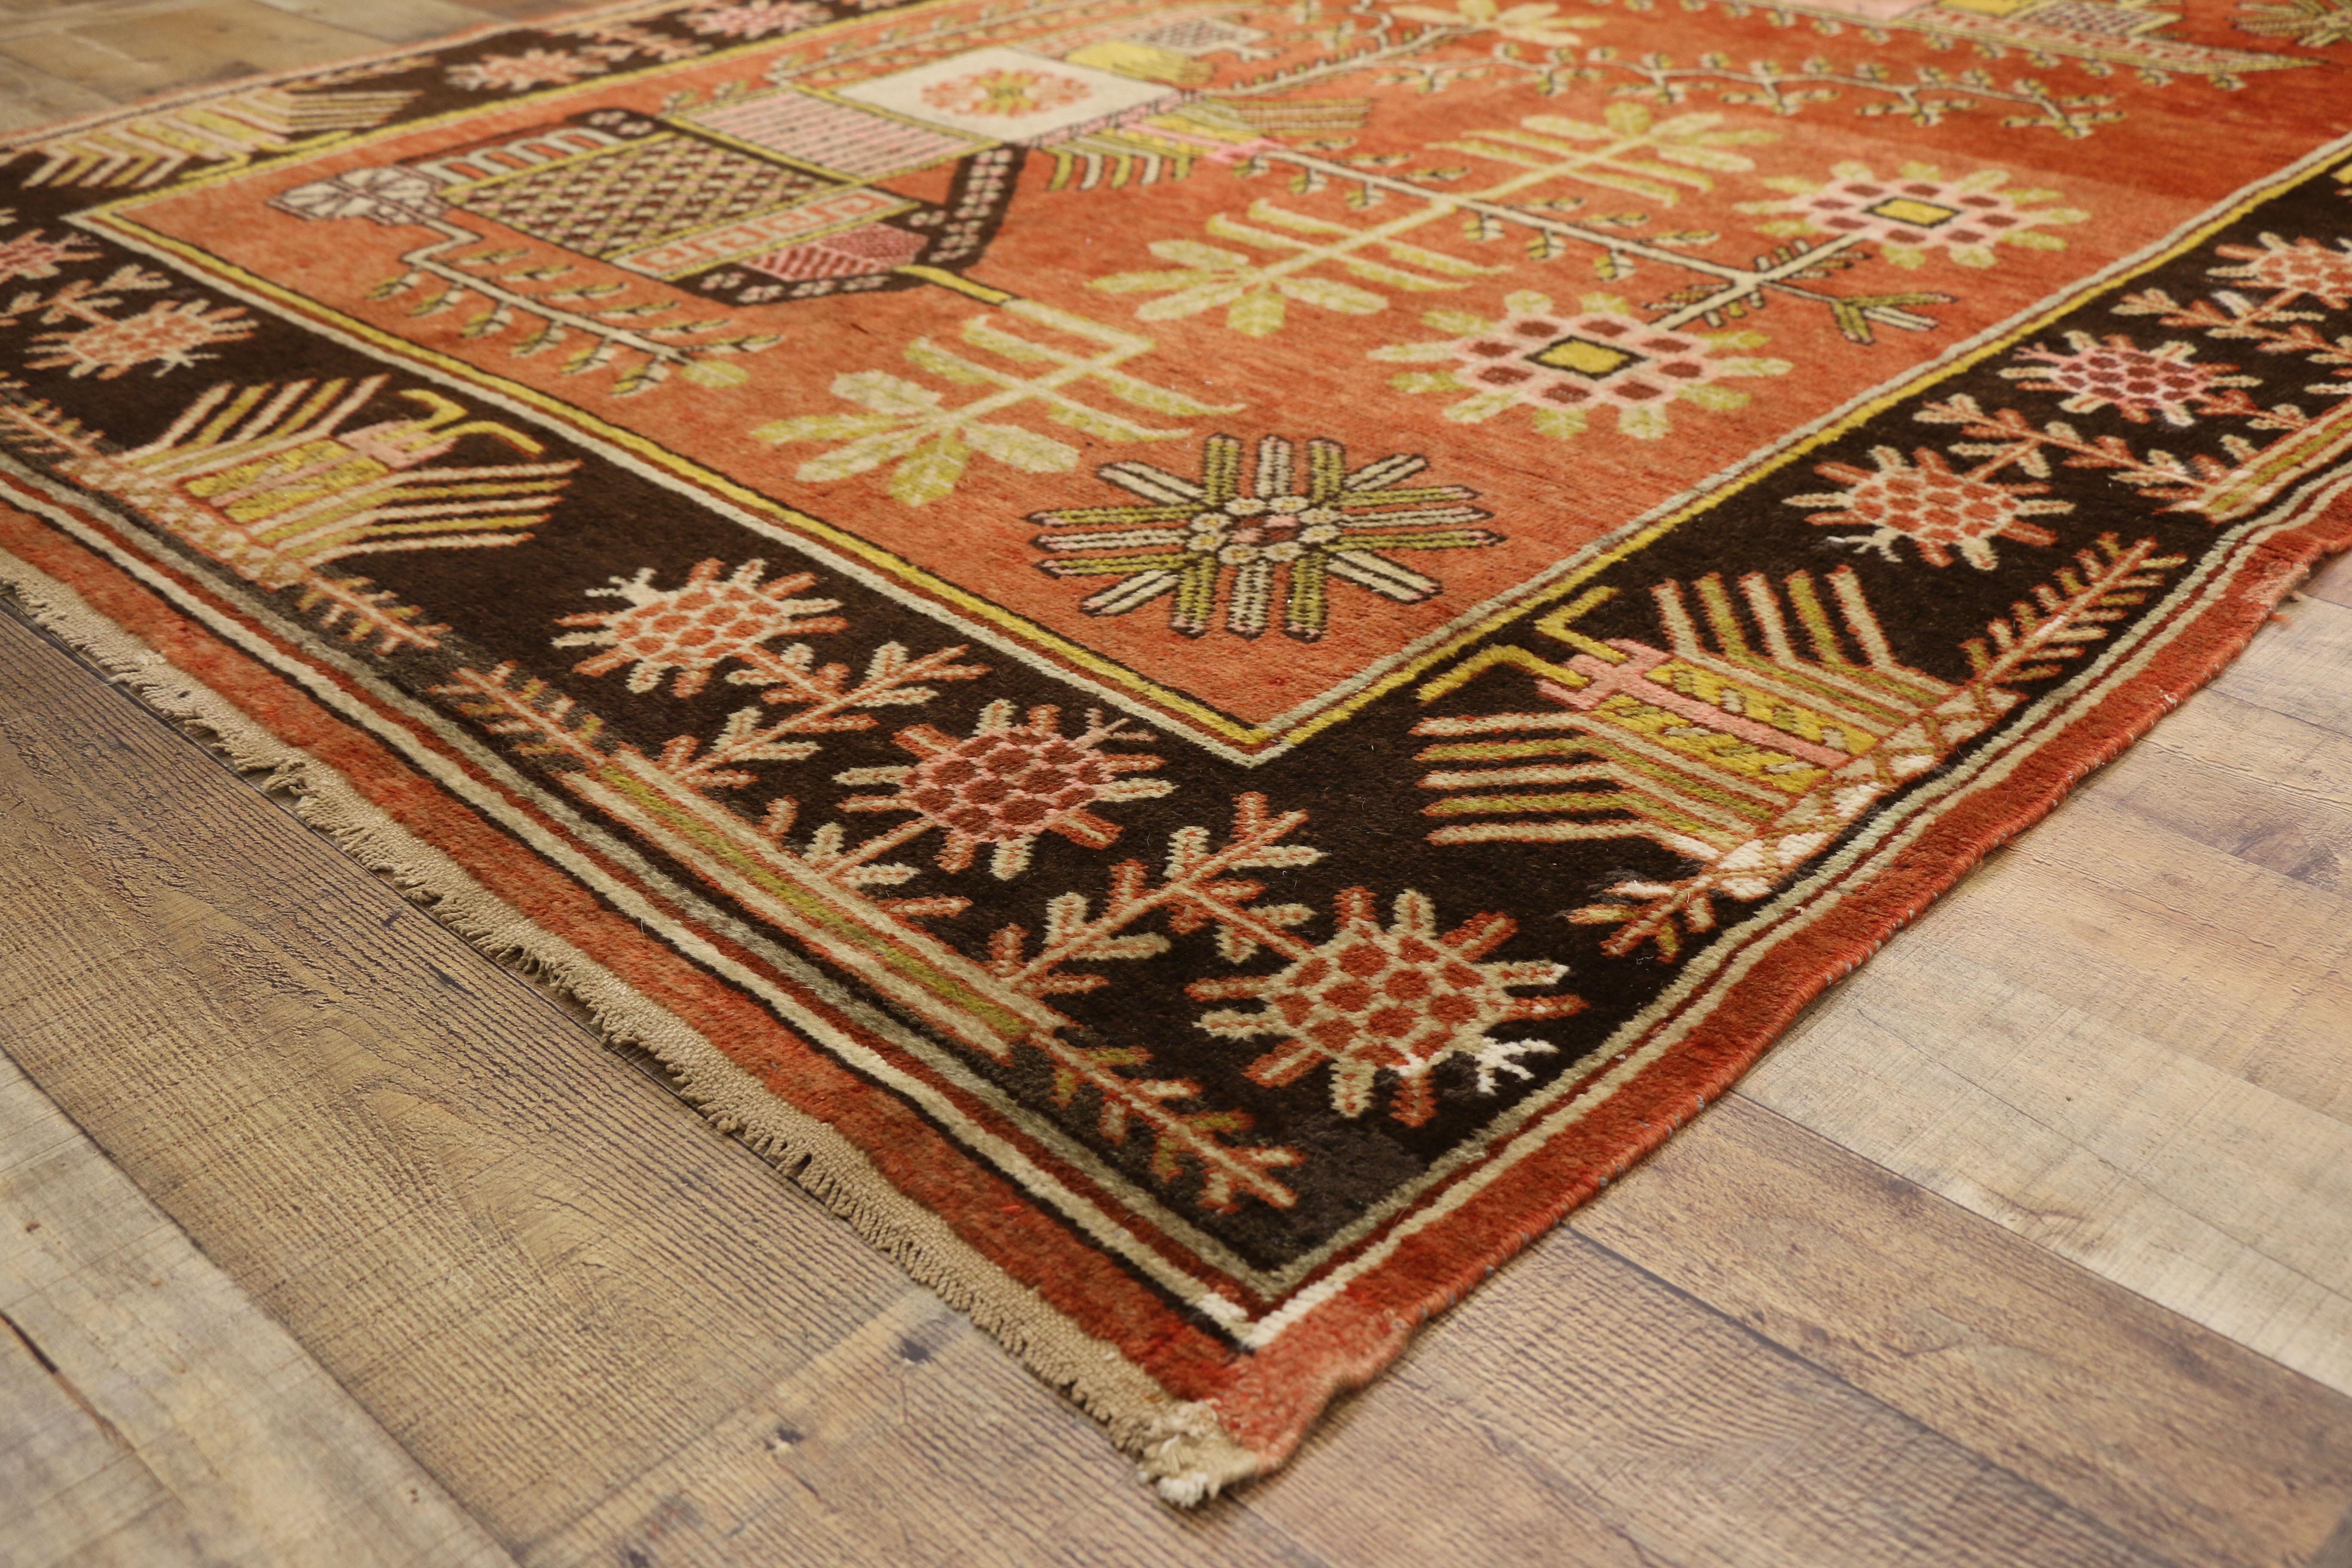 20th Century Antique Eastern Turkestan Pictorial Khotan Rug with Eclectic Northwestern Style For Sale